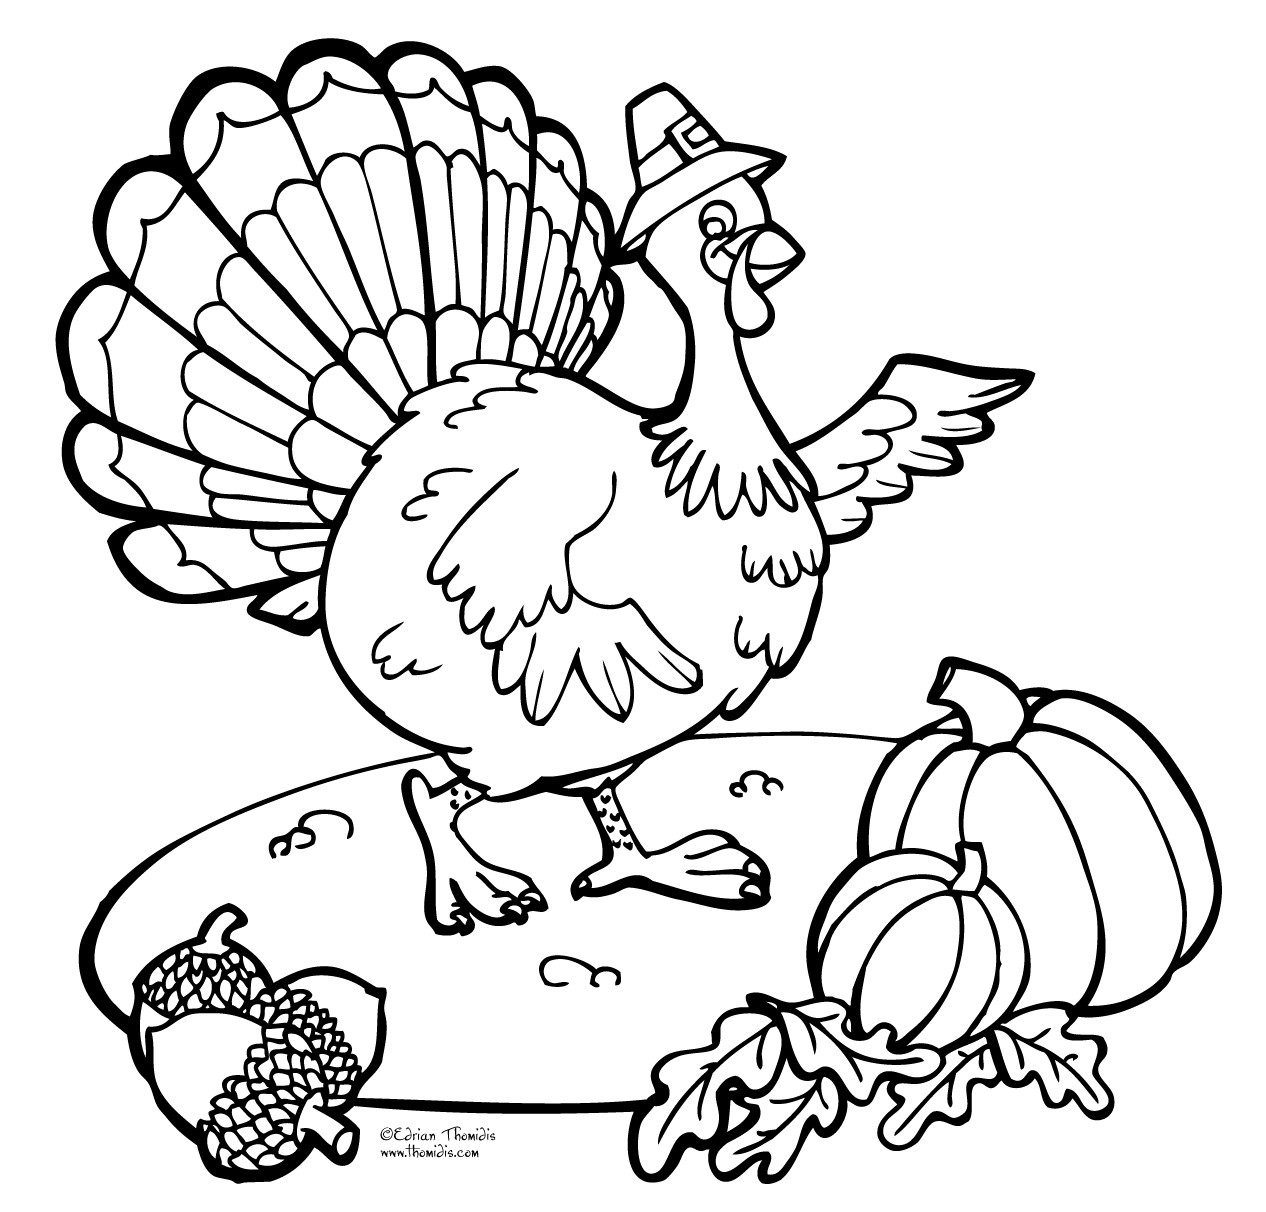 Thanksgiving Coloring Pages For Kids
 ThanksGiving Coloring Pages Free Printable